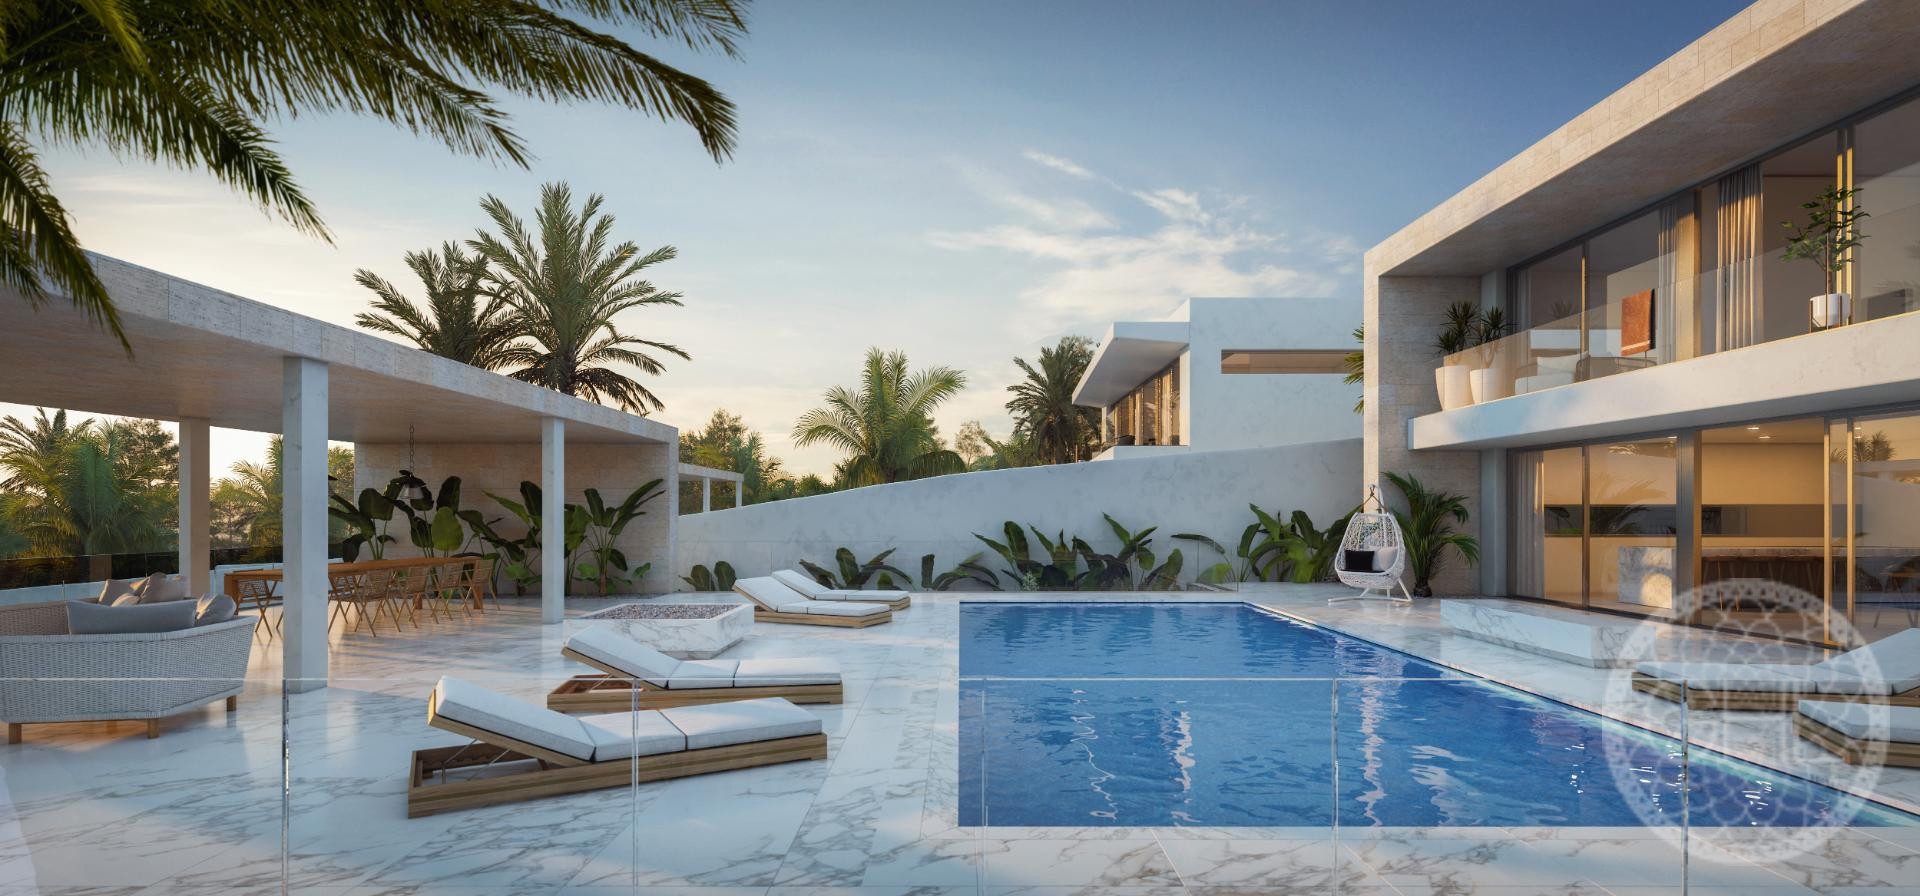 Exquisite new luxury villas with stunning sea views in great location ...